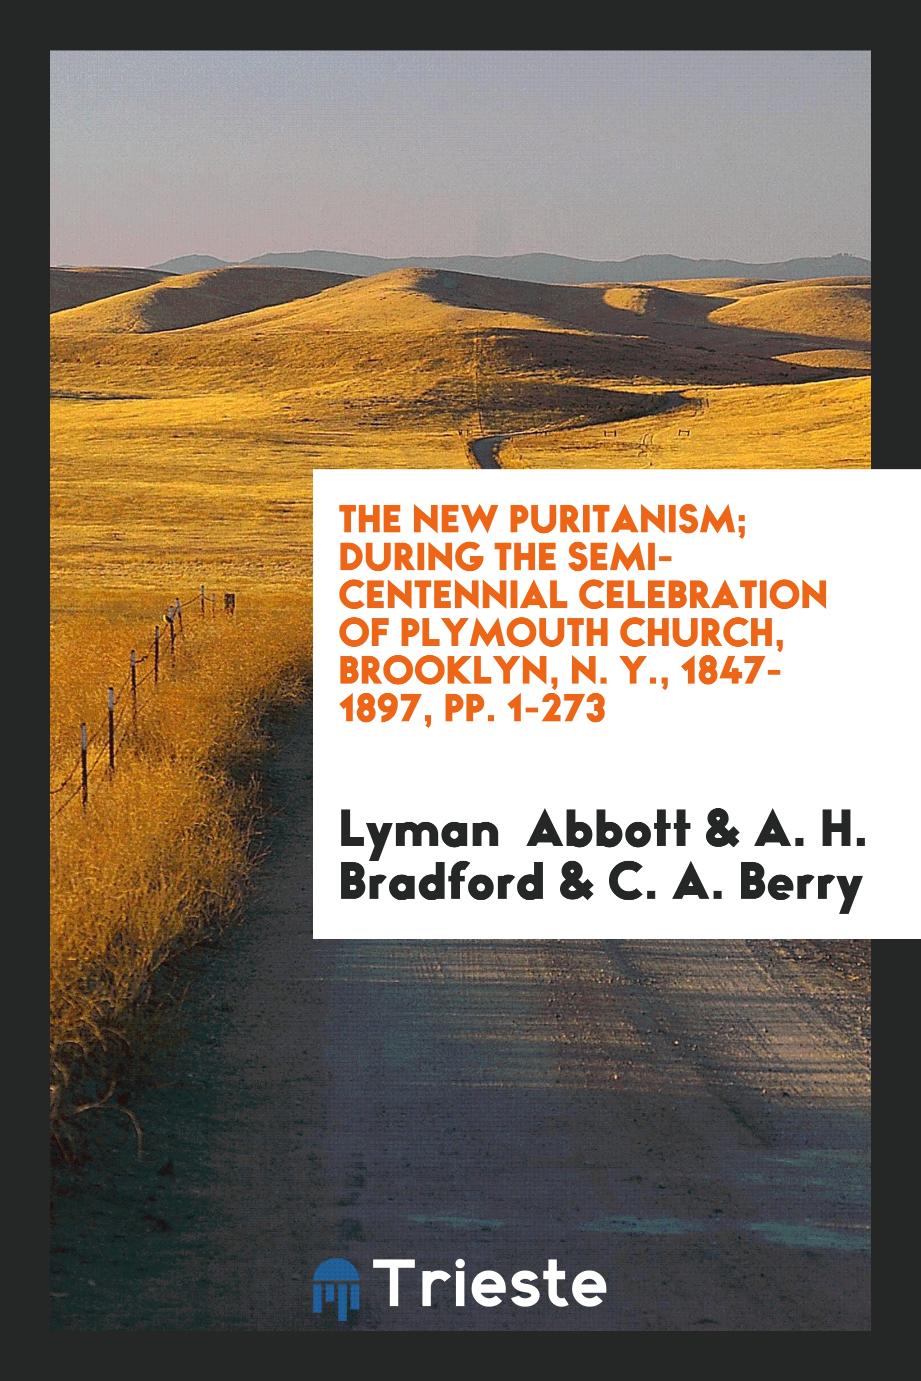 The New Puritanism; During the Semi-Centennial Celebration of Plymouth Church, Brooklyn, N. Y., 1847-1897, pp. 1-273